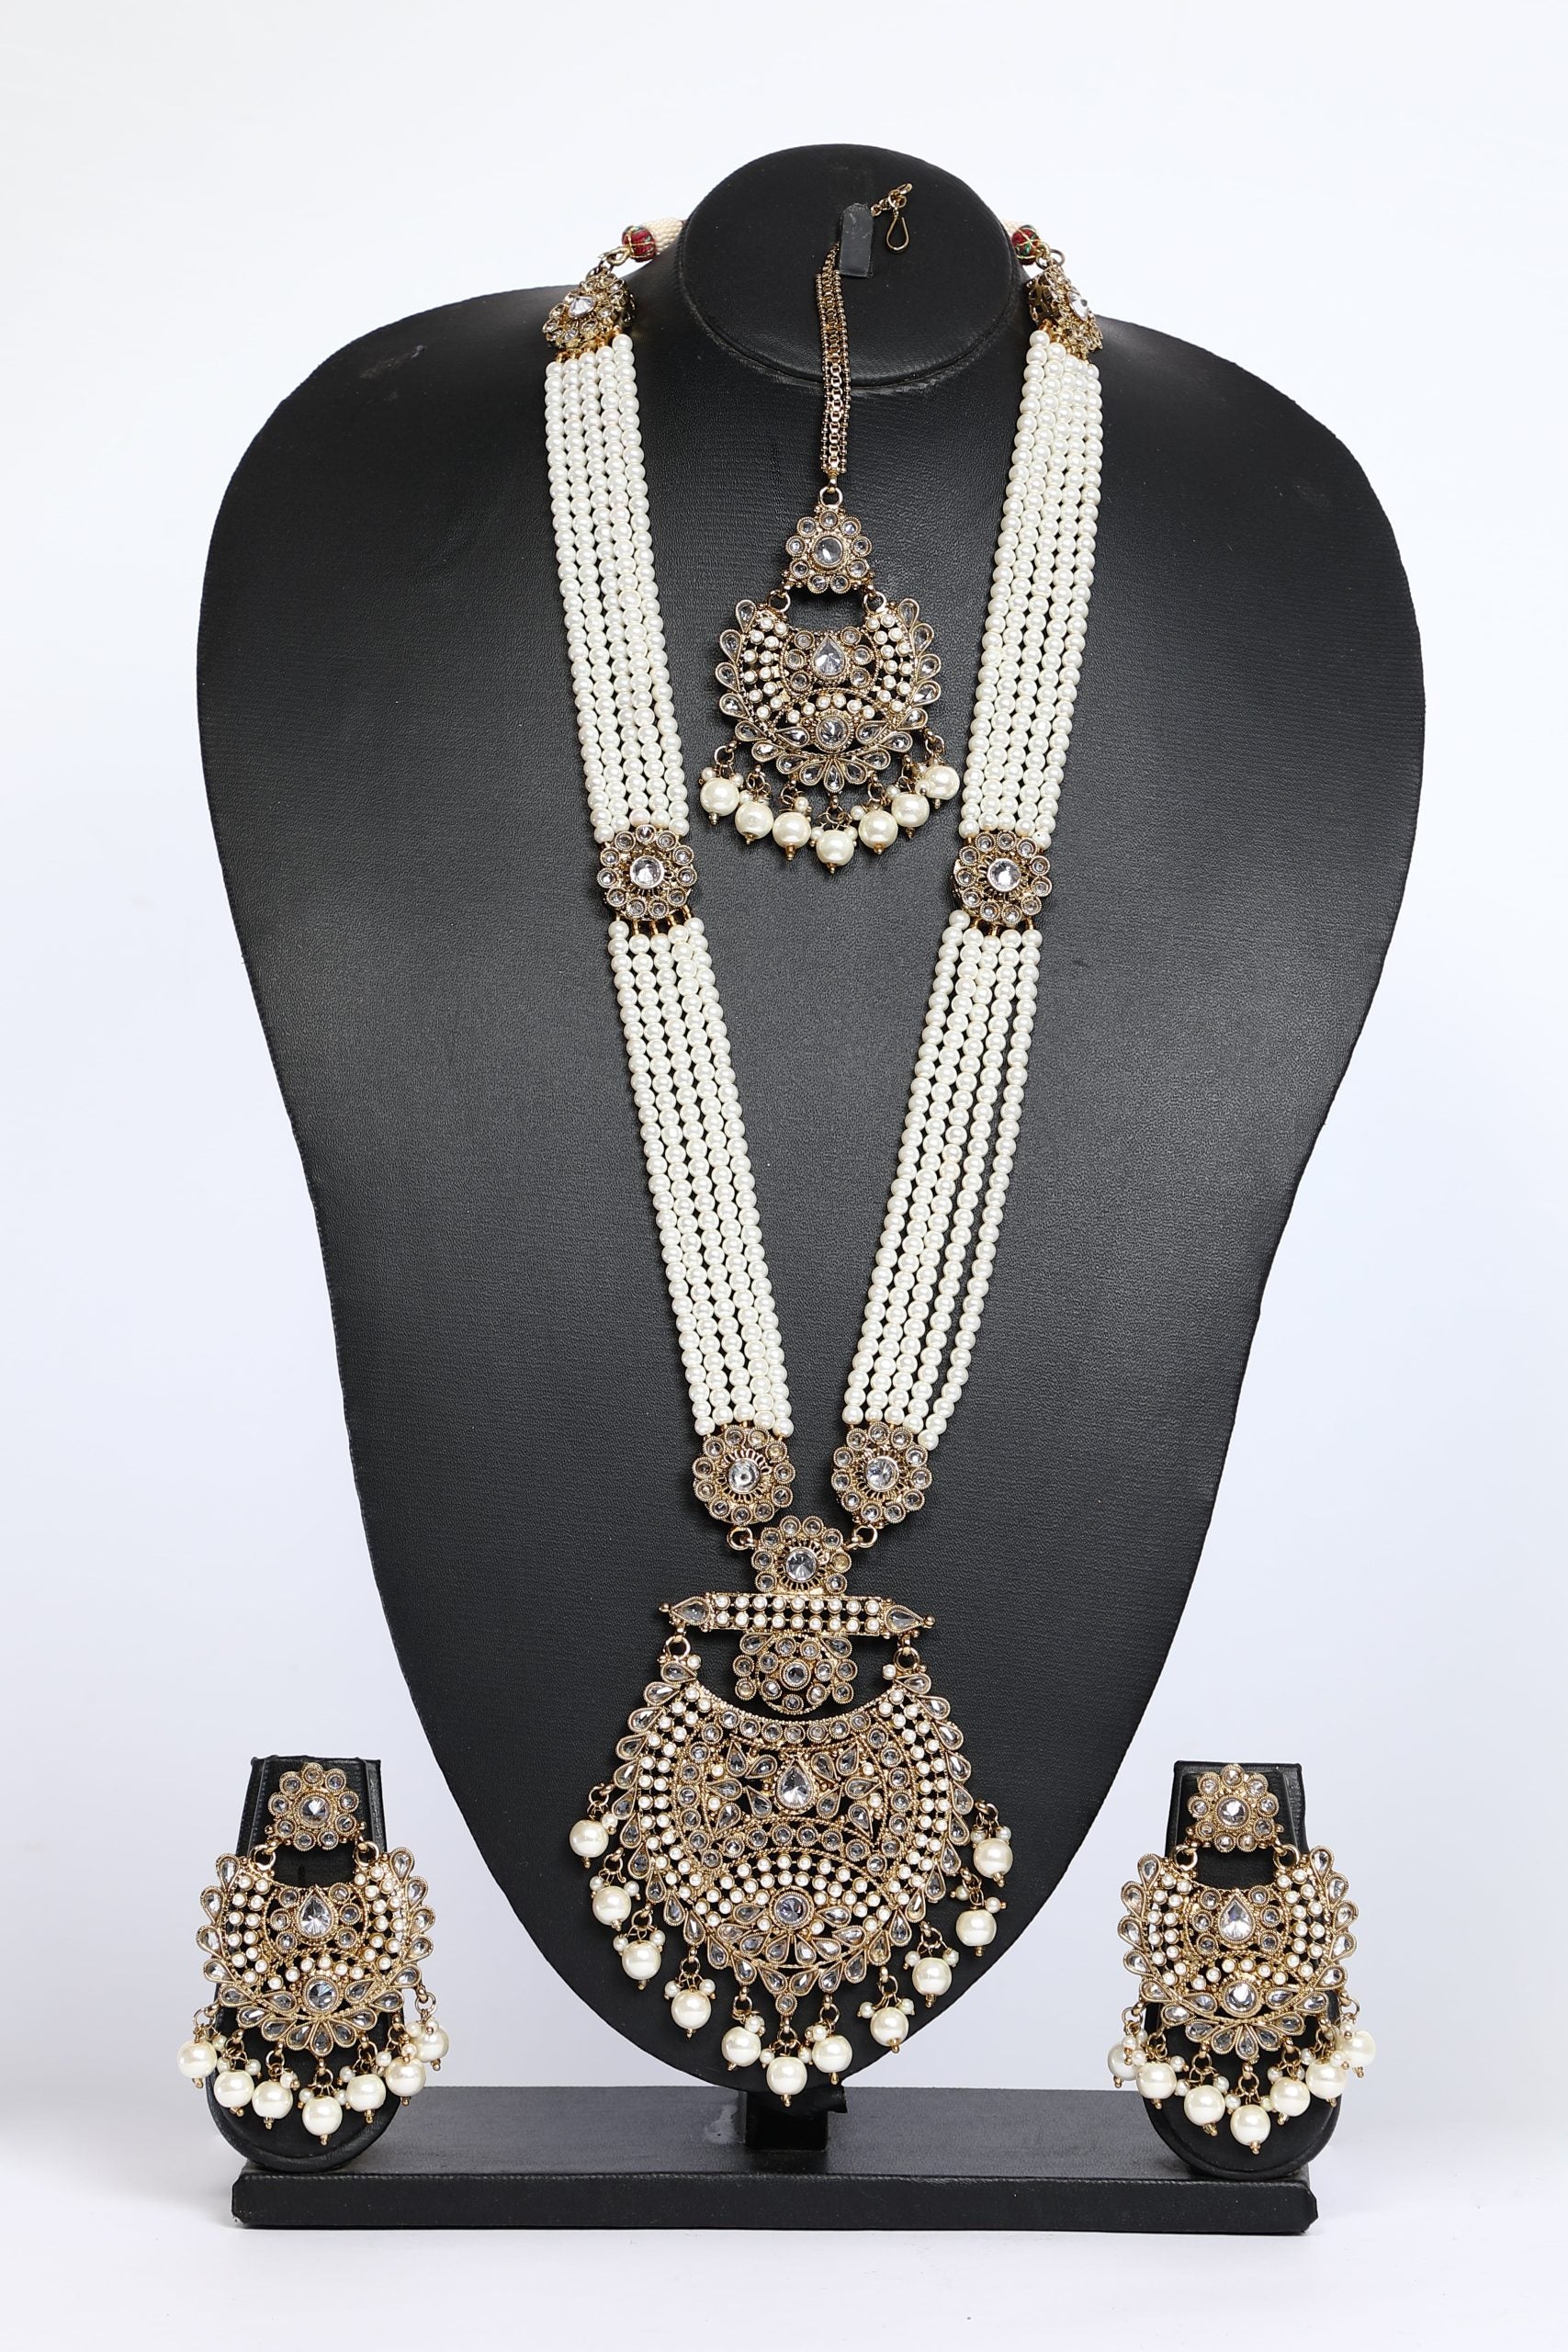 Beaded Long Necklace Set in White Color For Bridal - 3594